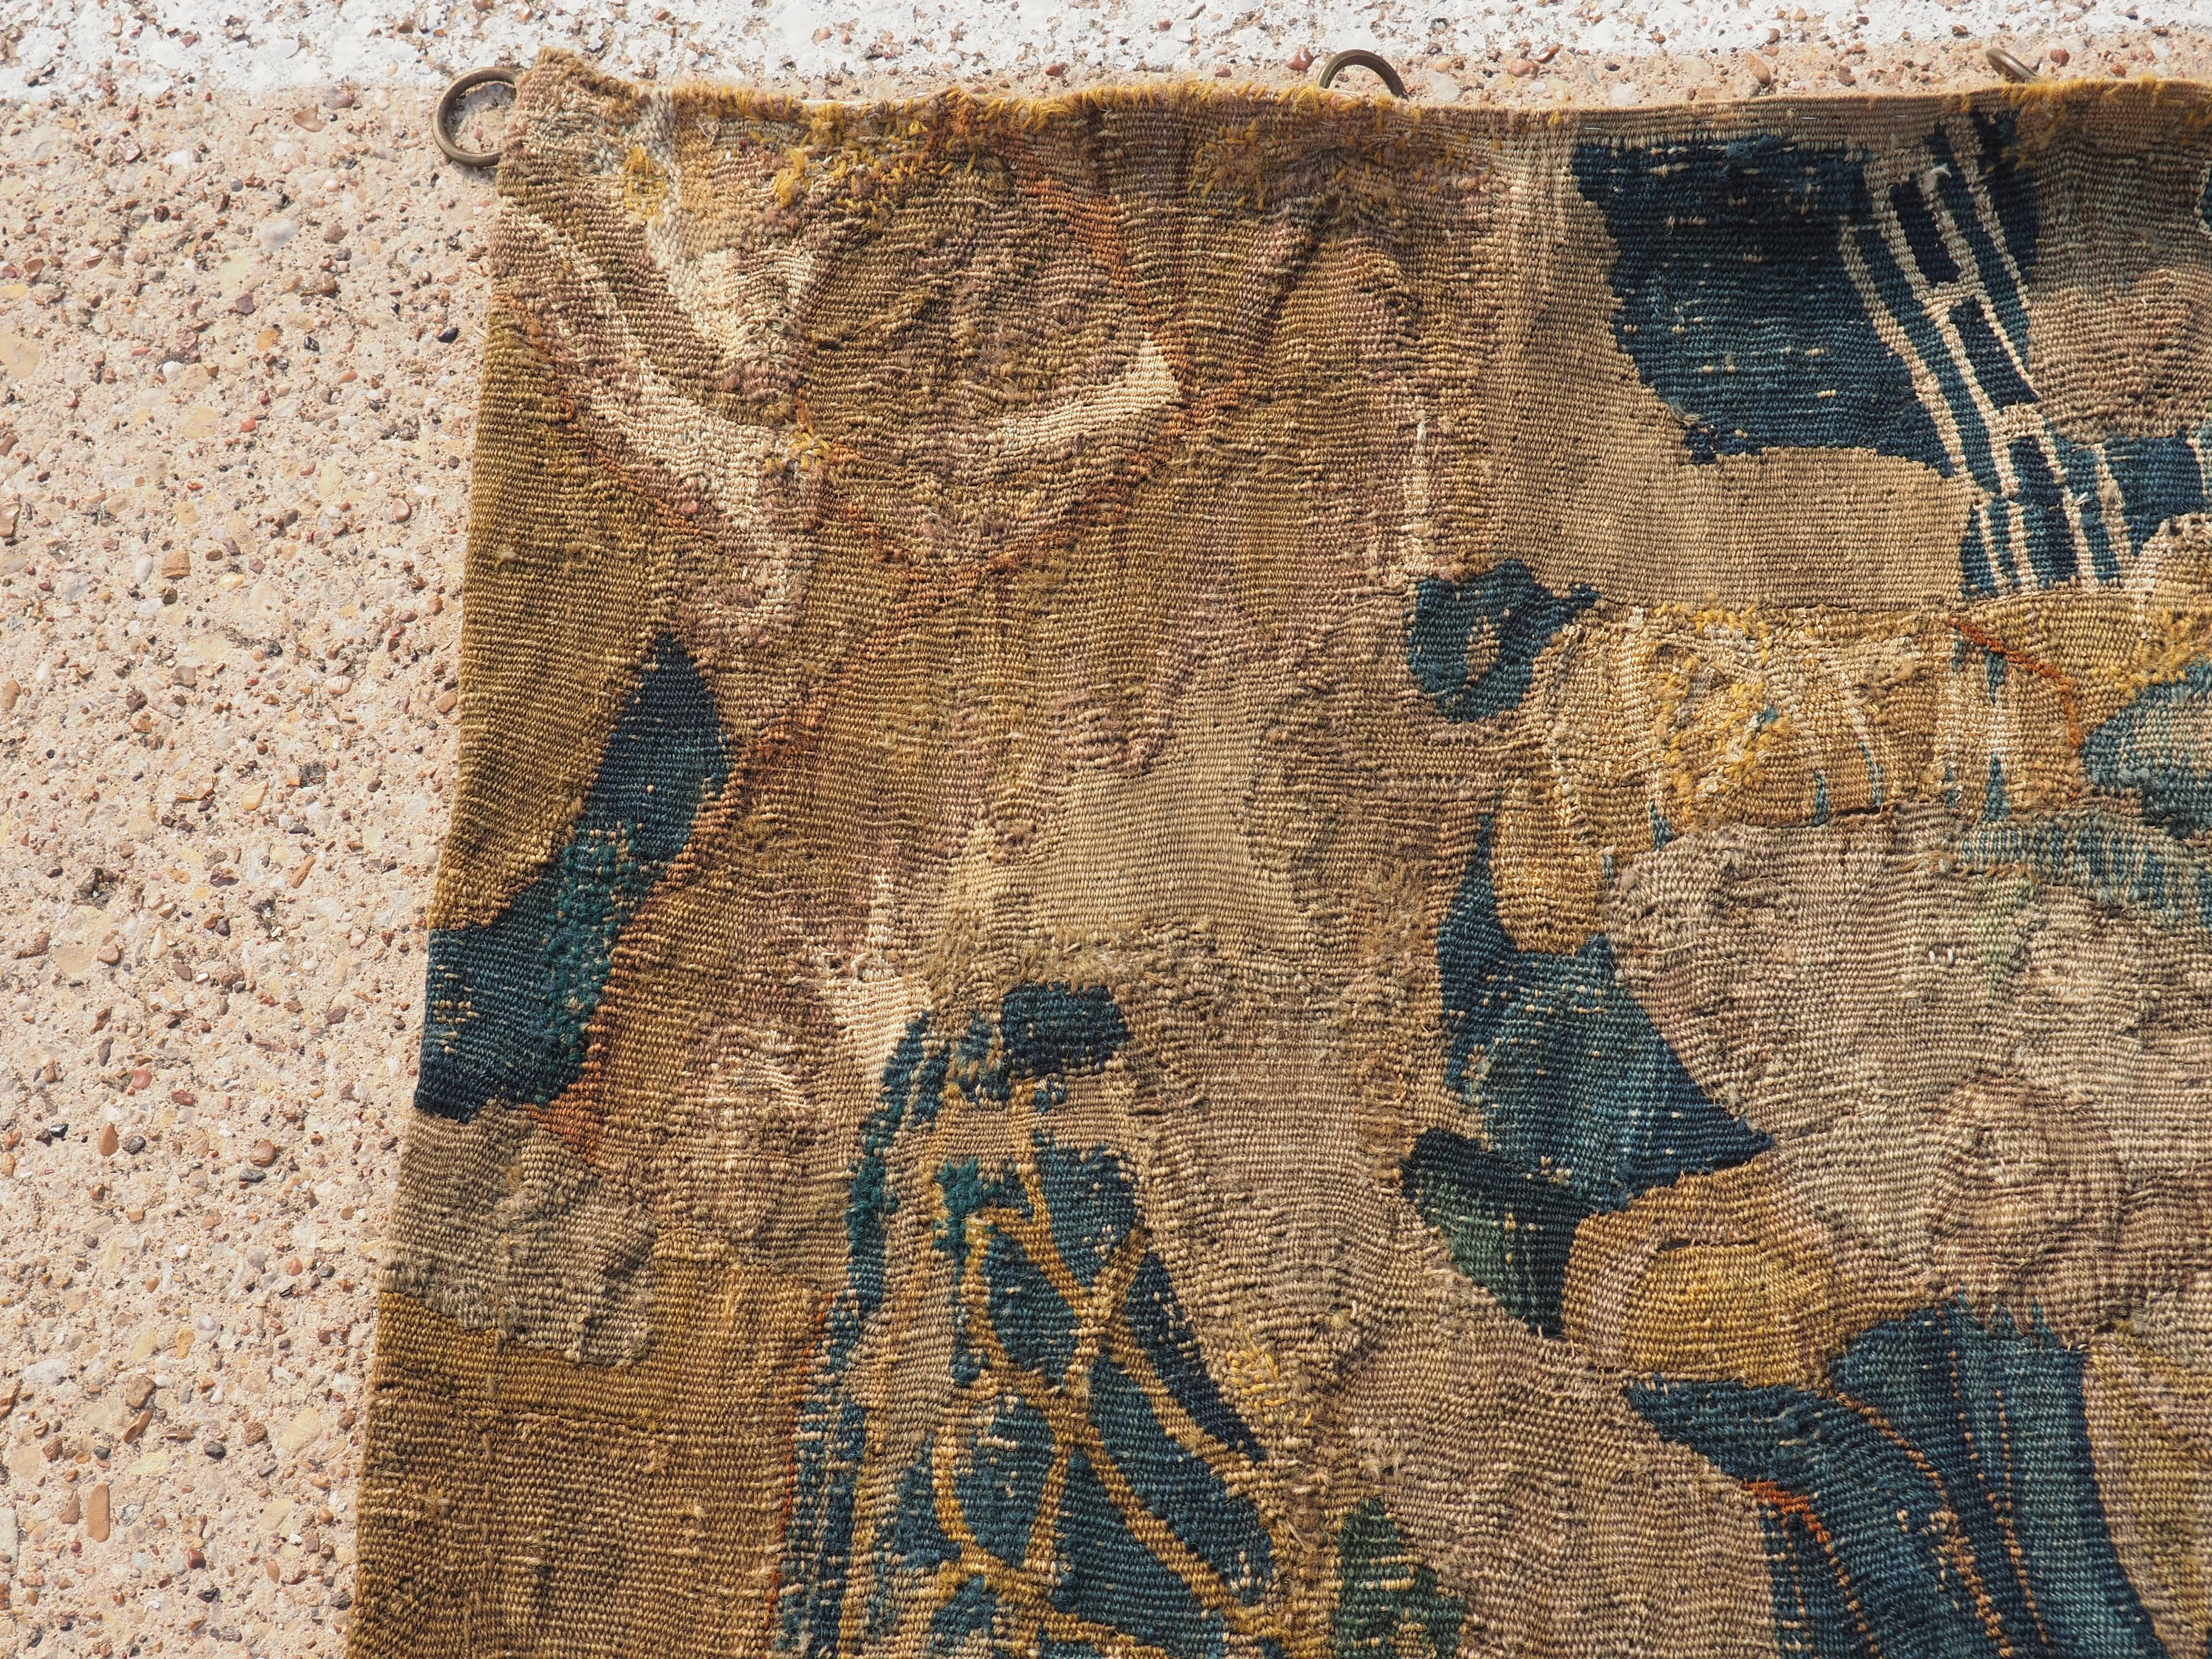 Belgian 17th Century Tapestry Fragment from Flanders